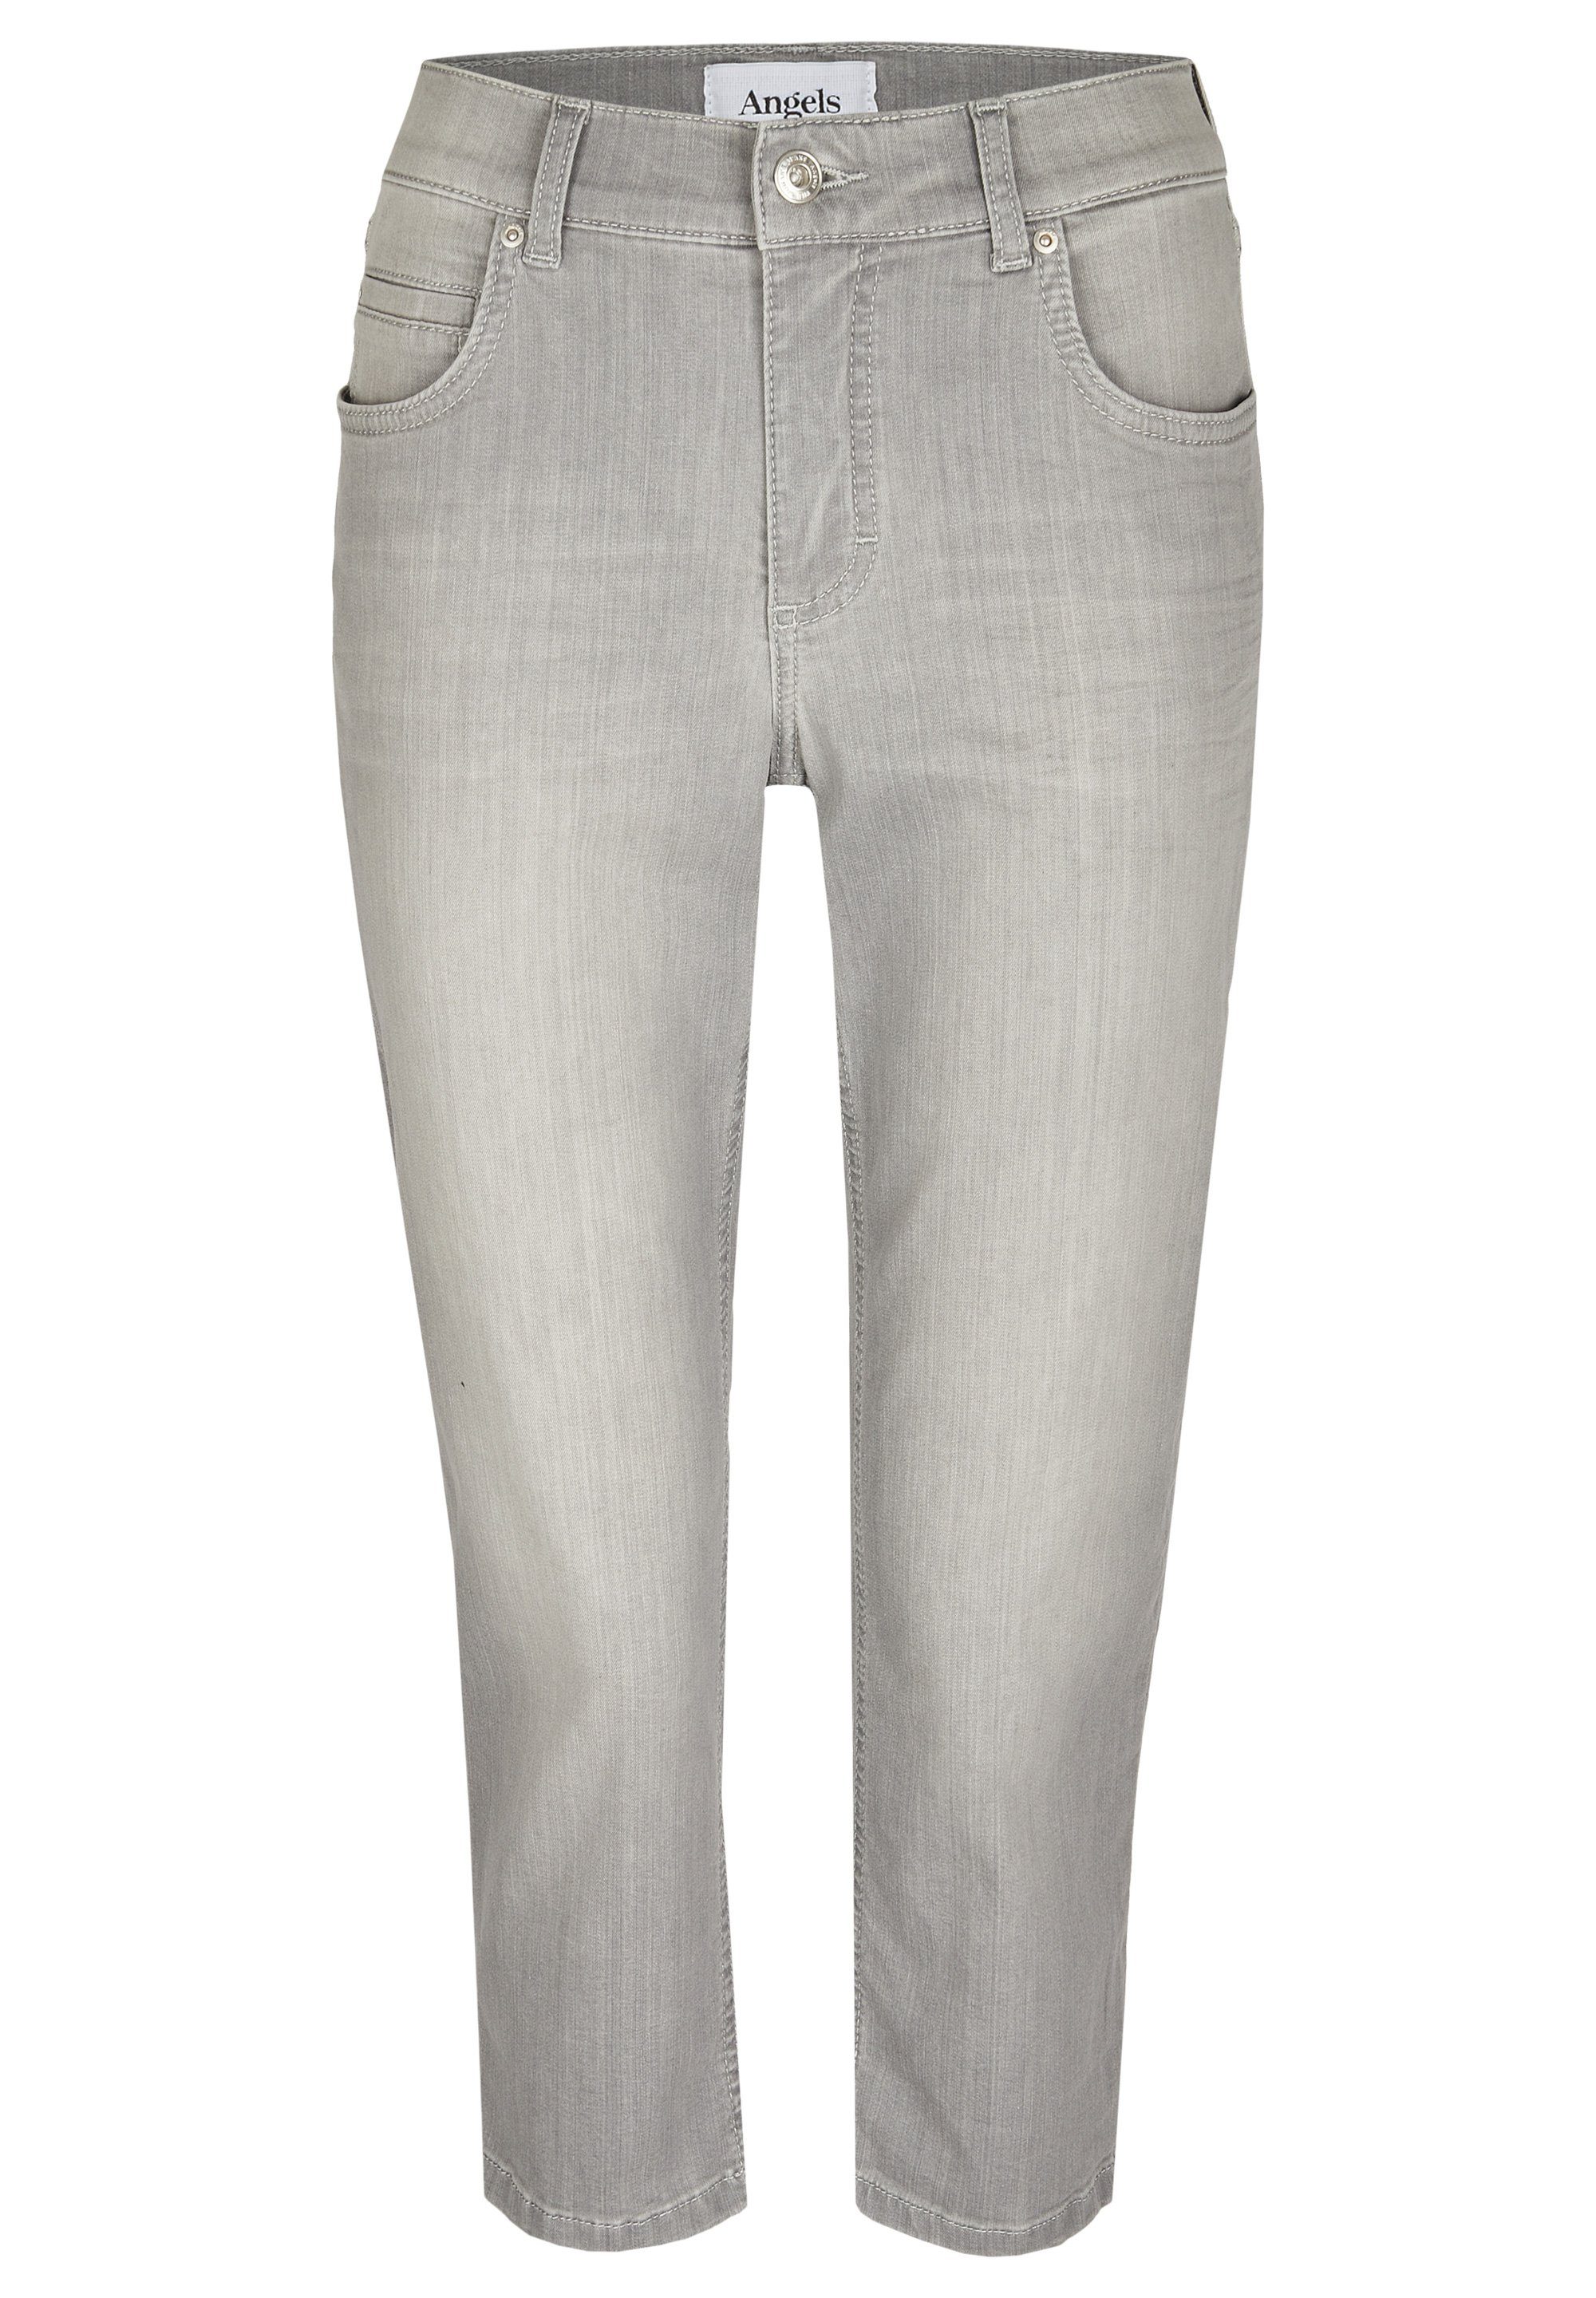 ANGELS Stretch-Jeans ANGELS JEANS CICI TU light grey used 332 750000.1458 1458 light grey used